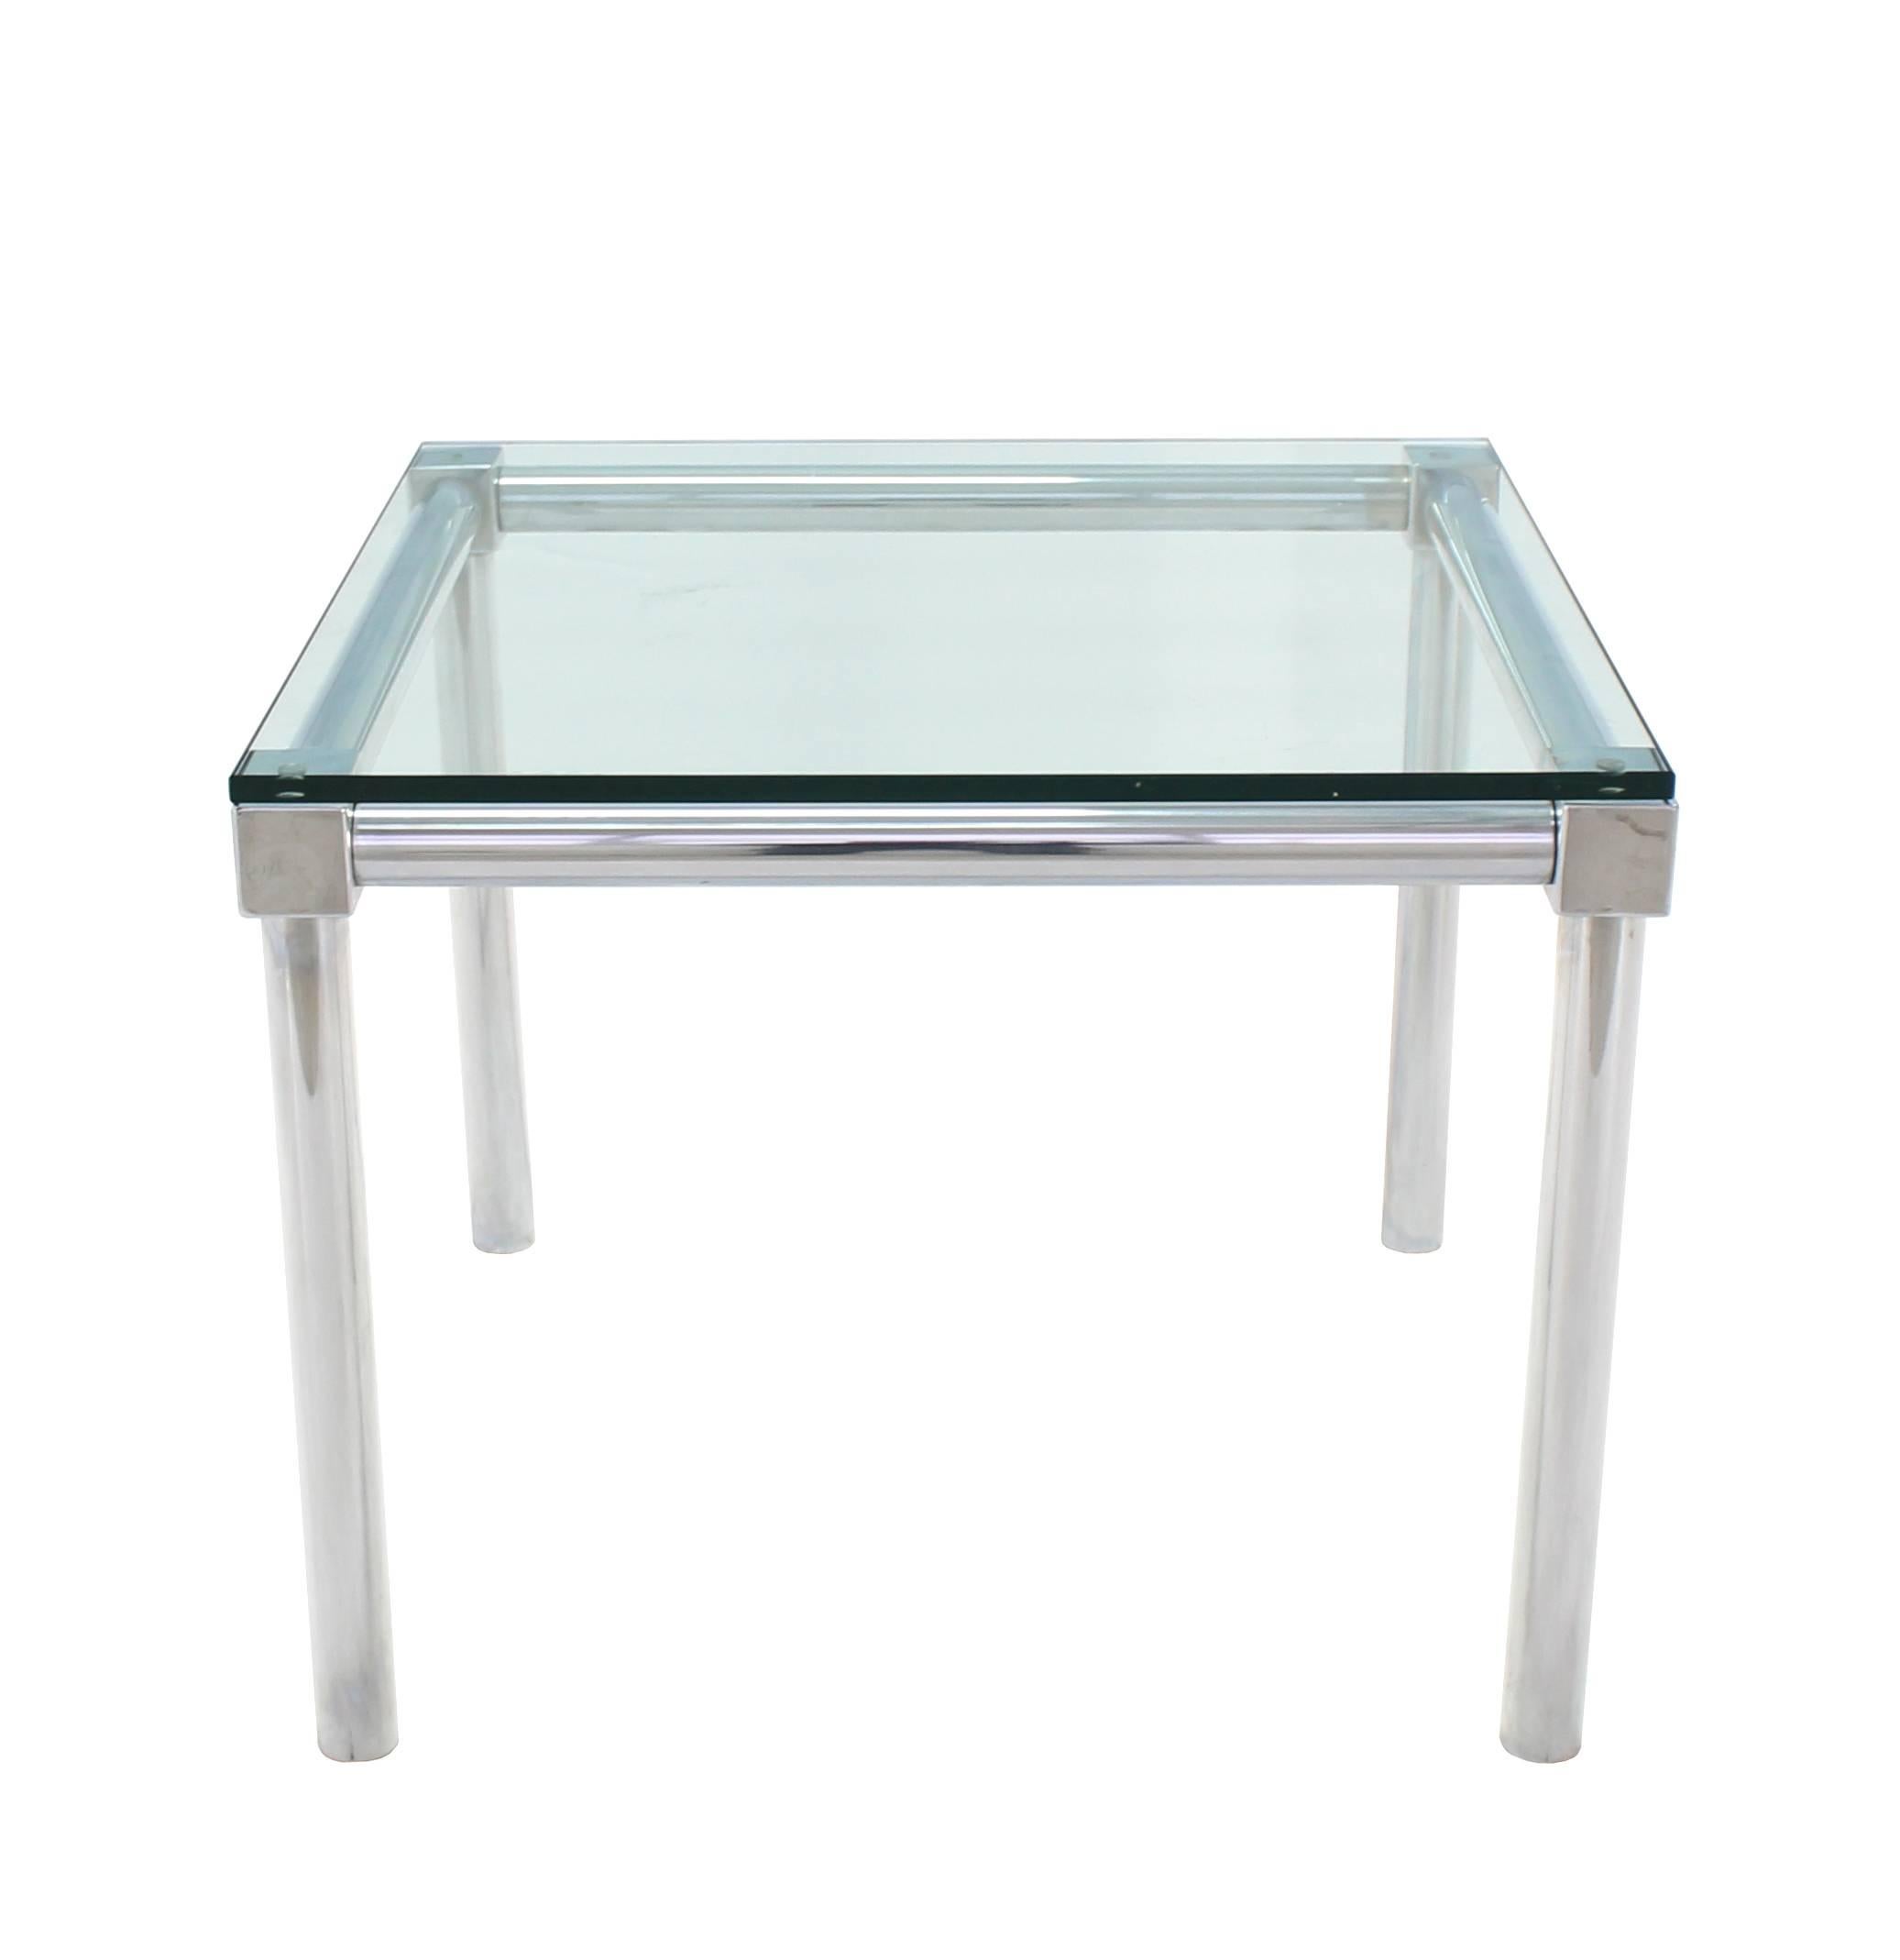 Very nice Mid-Century Modern chrome and glass square game table.